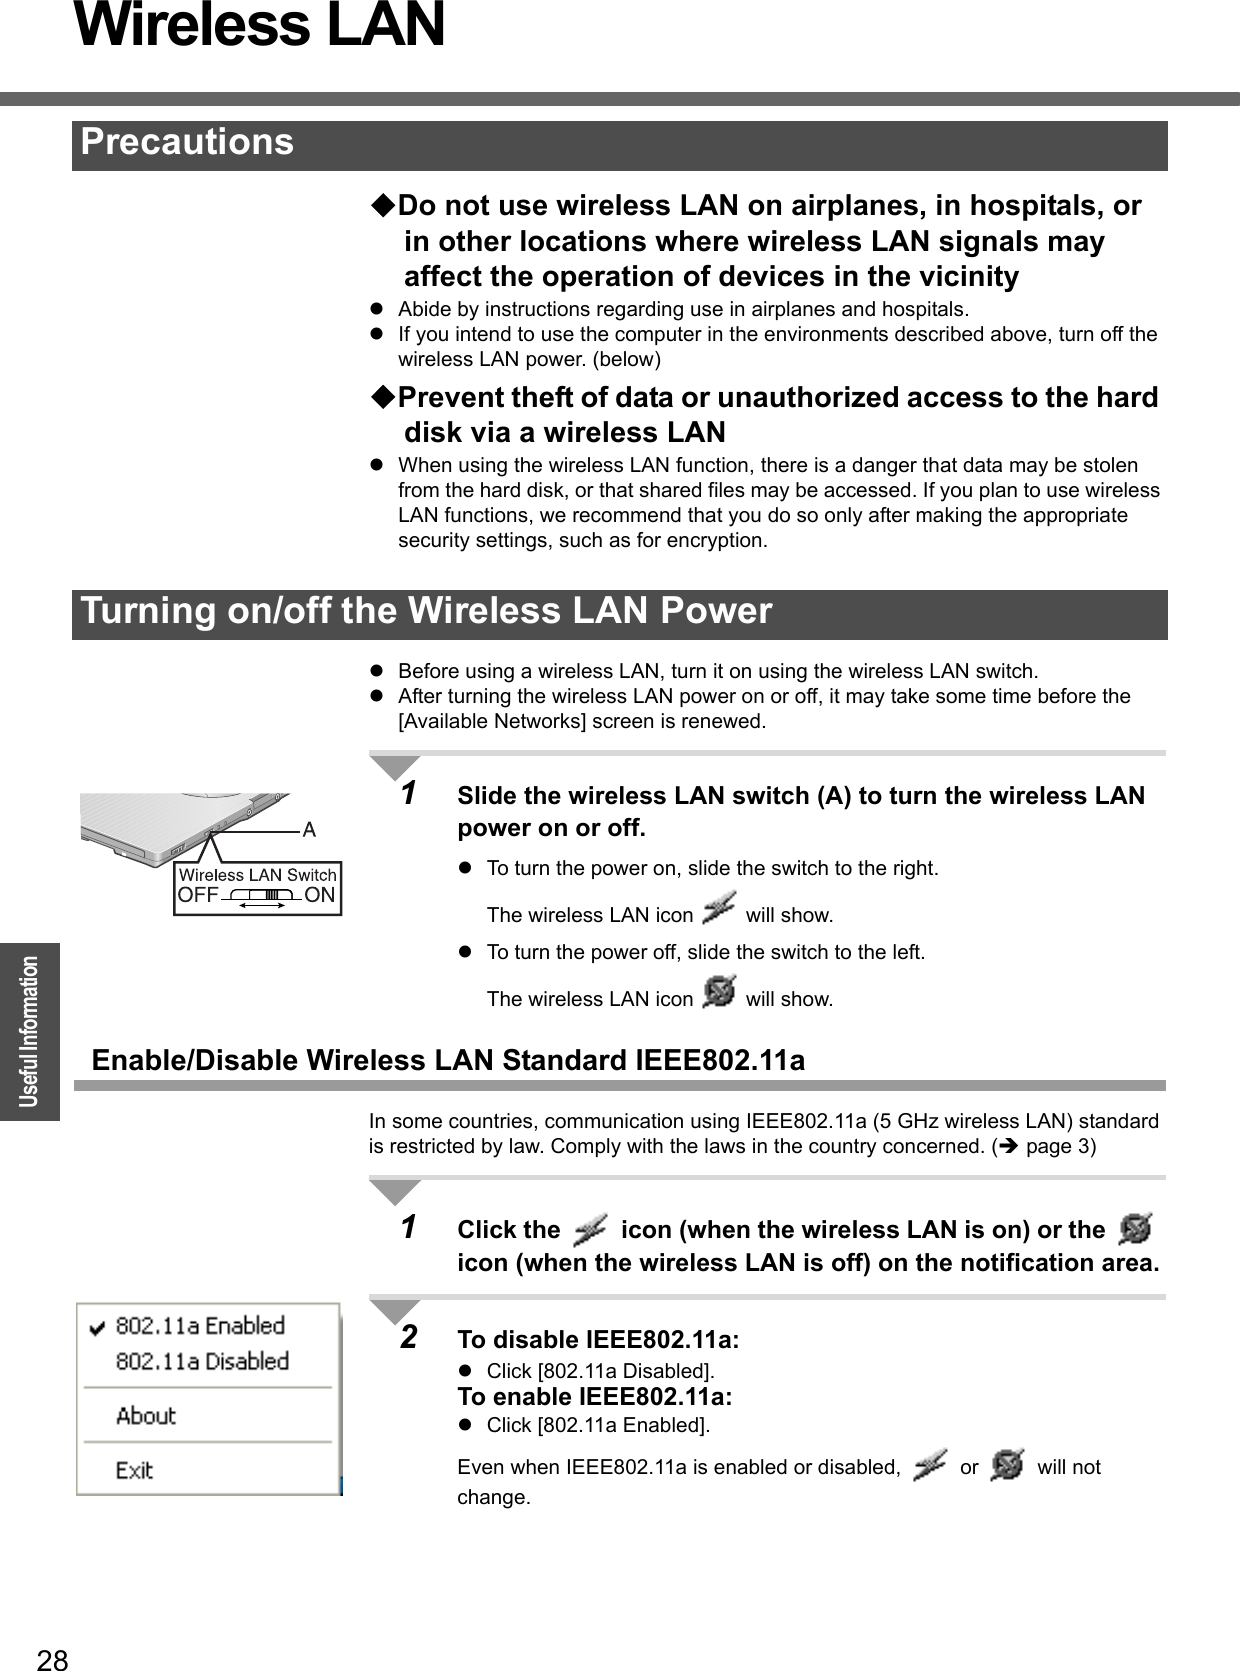 28OperationUseful InformationWireless LAN Do not use wireless LAN on airplanes, in hospitals, or in other locations where wireless LAN signals may affect the operation of devices in the vicinityzAbide by instructions regarding use in airplanes and hospitals.zIf you intend to use the computer in the environments described above, turn off the wireless LAN power. (below)Prevent theft of data or unauthorized access to the hard disk via a wireless LANzWhen using the wireless LAN function, there is a danger that data may be stolen from the hard disk, or that shared files may be accessed. If you plan to use wireless LAN functions, we recommend that you do so only after making the appropriate security settings, such as for encryption.zBefore using a wireless LAN, turn it on using the wireless LAN switch.zAfter turning the wireless LAN power on or off, it may take some time before the [Available Networks] screen is renewed.1Slide the wireless LAN switch (A) to turn the wireless LAN power on or off. zTo turn the power on, slide the switch to the right. The wireless LAN icon   will show. zTo turn the power off, slide the switch to the left. The wireless LAN icon   will show.Enable/Disable Wireless LAN Standard IEEE802.11aIn some countries, communication using IEEE802.11a (5 GHz wireless LAN) standard is restricted by law. Comply with the laws in the country concerned. (Îpage 3)1Click the   icon (when the wireless LAN is on) or the   icon (when the wireless LAN is off) on the notification area.2To disable IEEE802.11a:zClick [802.11a Disabled].To enable IEEE802.11a:zClick [802.11a Enabled].Even when IEEE802.11a is enabled or disabled,   or   will not change.PrecautionsTurning on/off the Wireless LAN Power